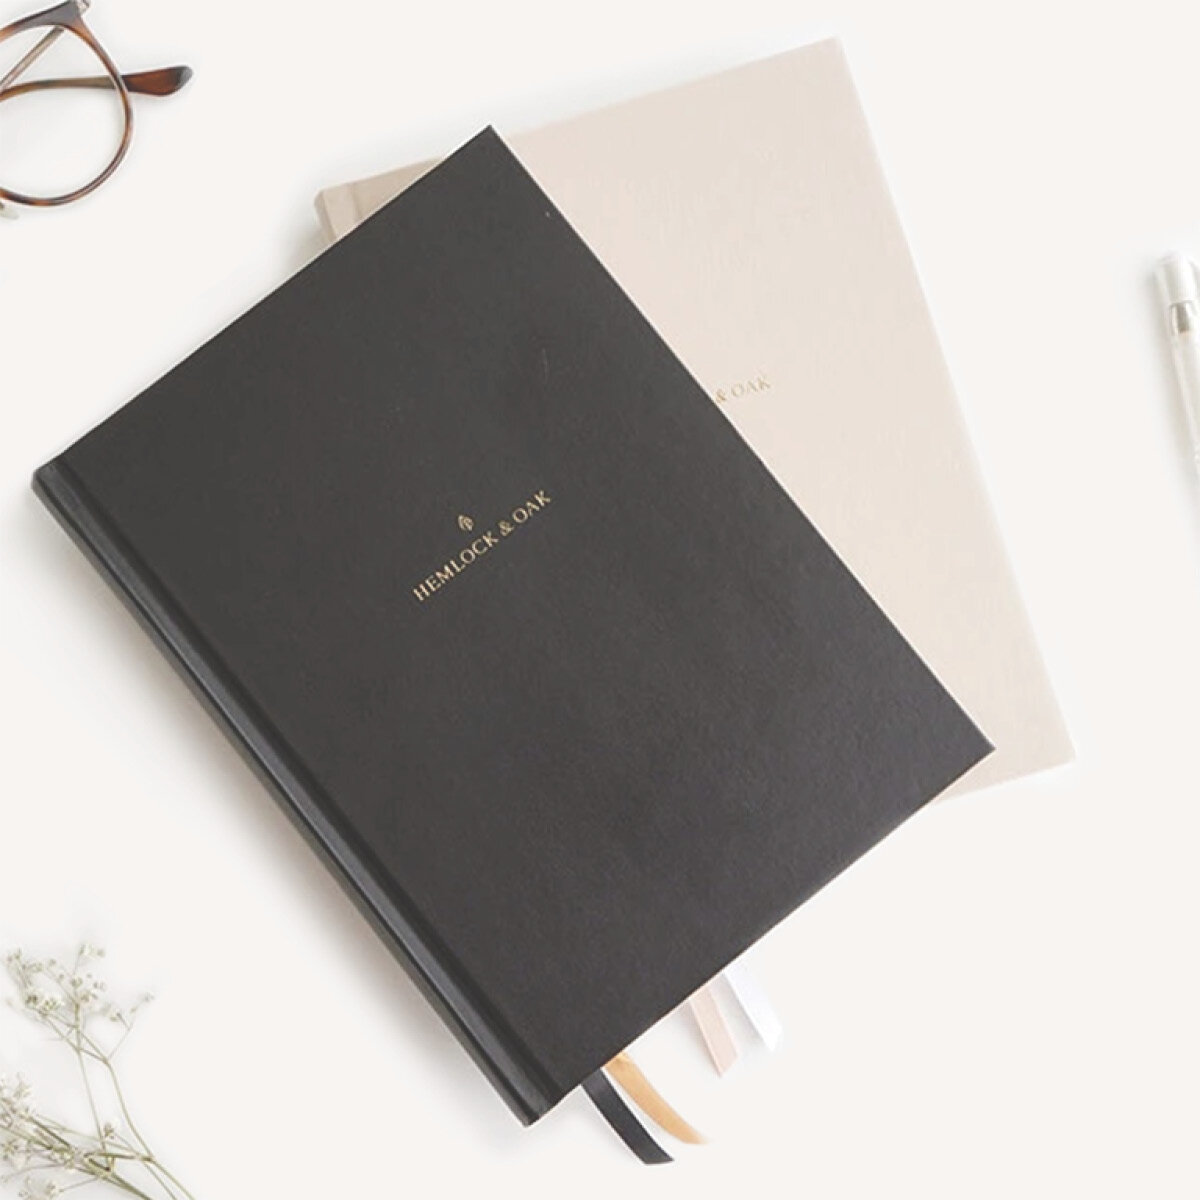 Simplicity Black Notebook - The #1 Notebook for minimalist